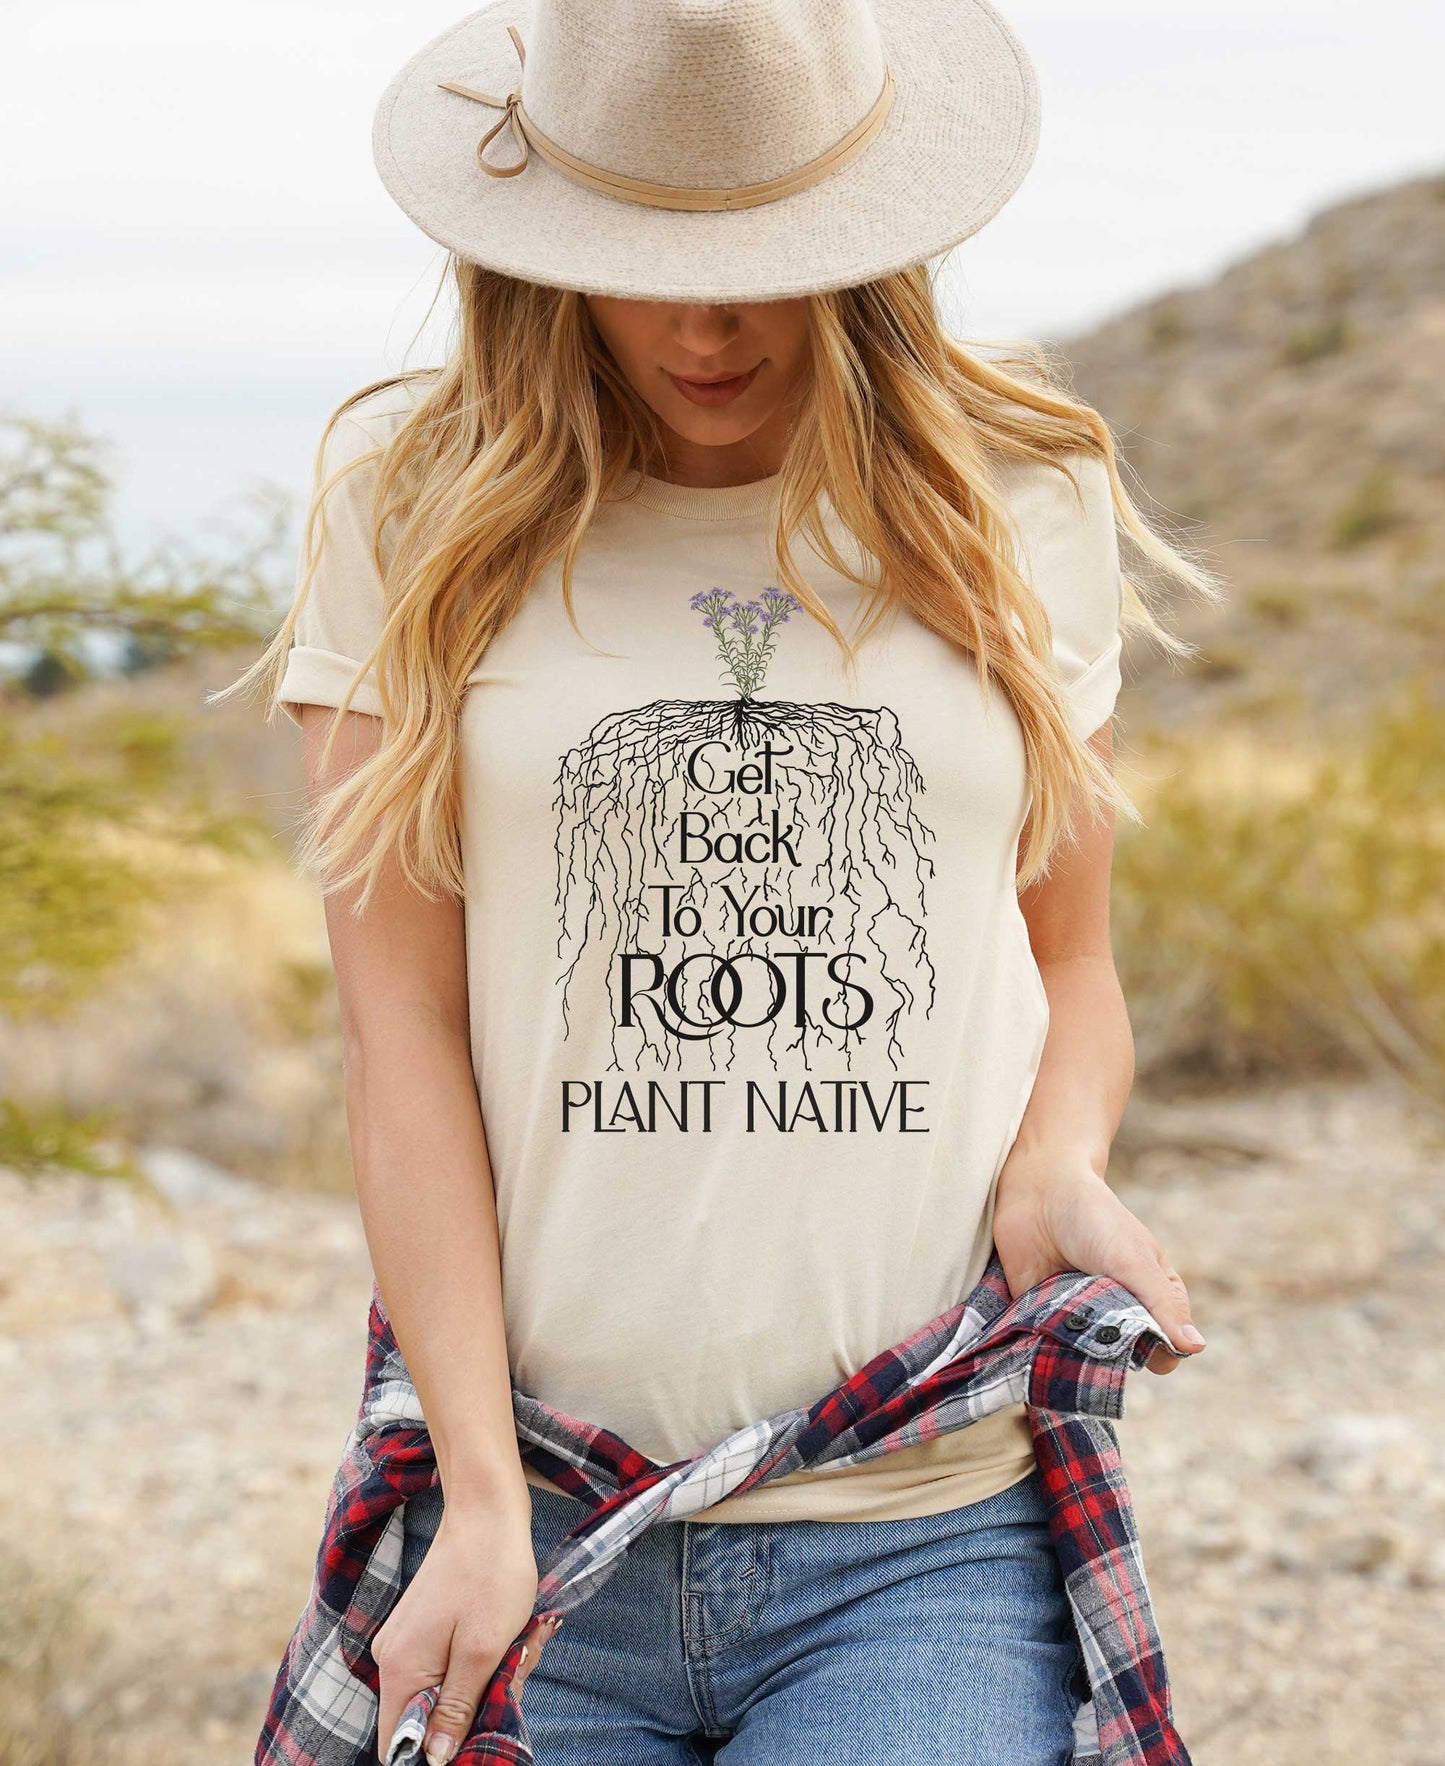 Plant Native, Get Back to Your Roots tee, Nature t-shirt for conservation, Environmental science gift for ecological teachers & gardeners.